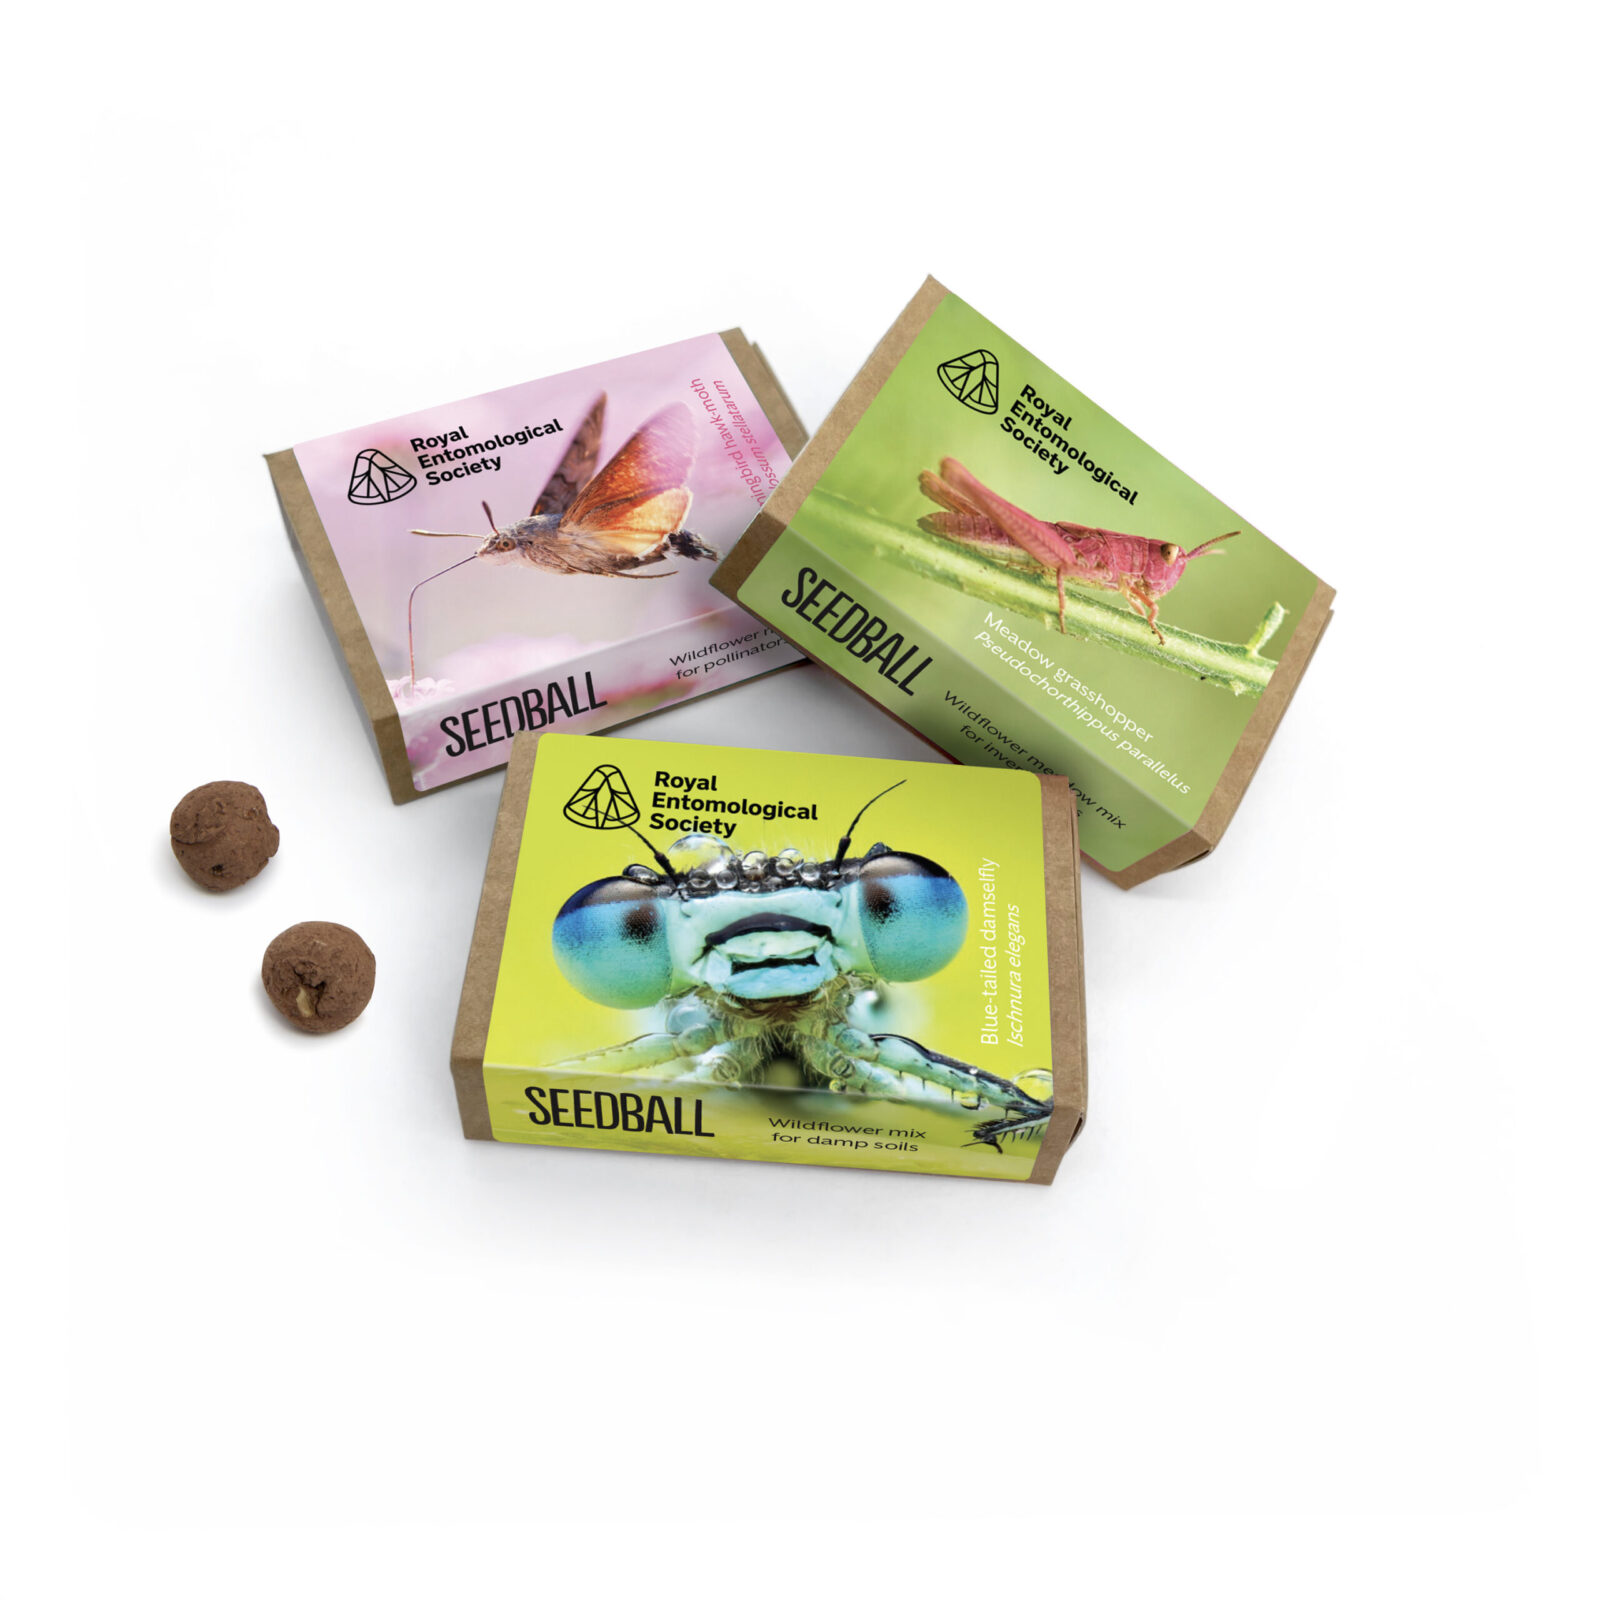 Three seed boxes, in collaboration with Seedball featuring a hummingbird hawkmoth on a pink background, a damselfly on a yellow background and a grasshopper on a green background.